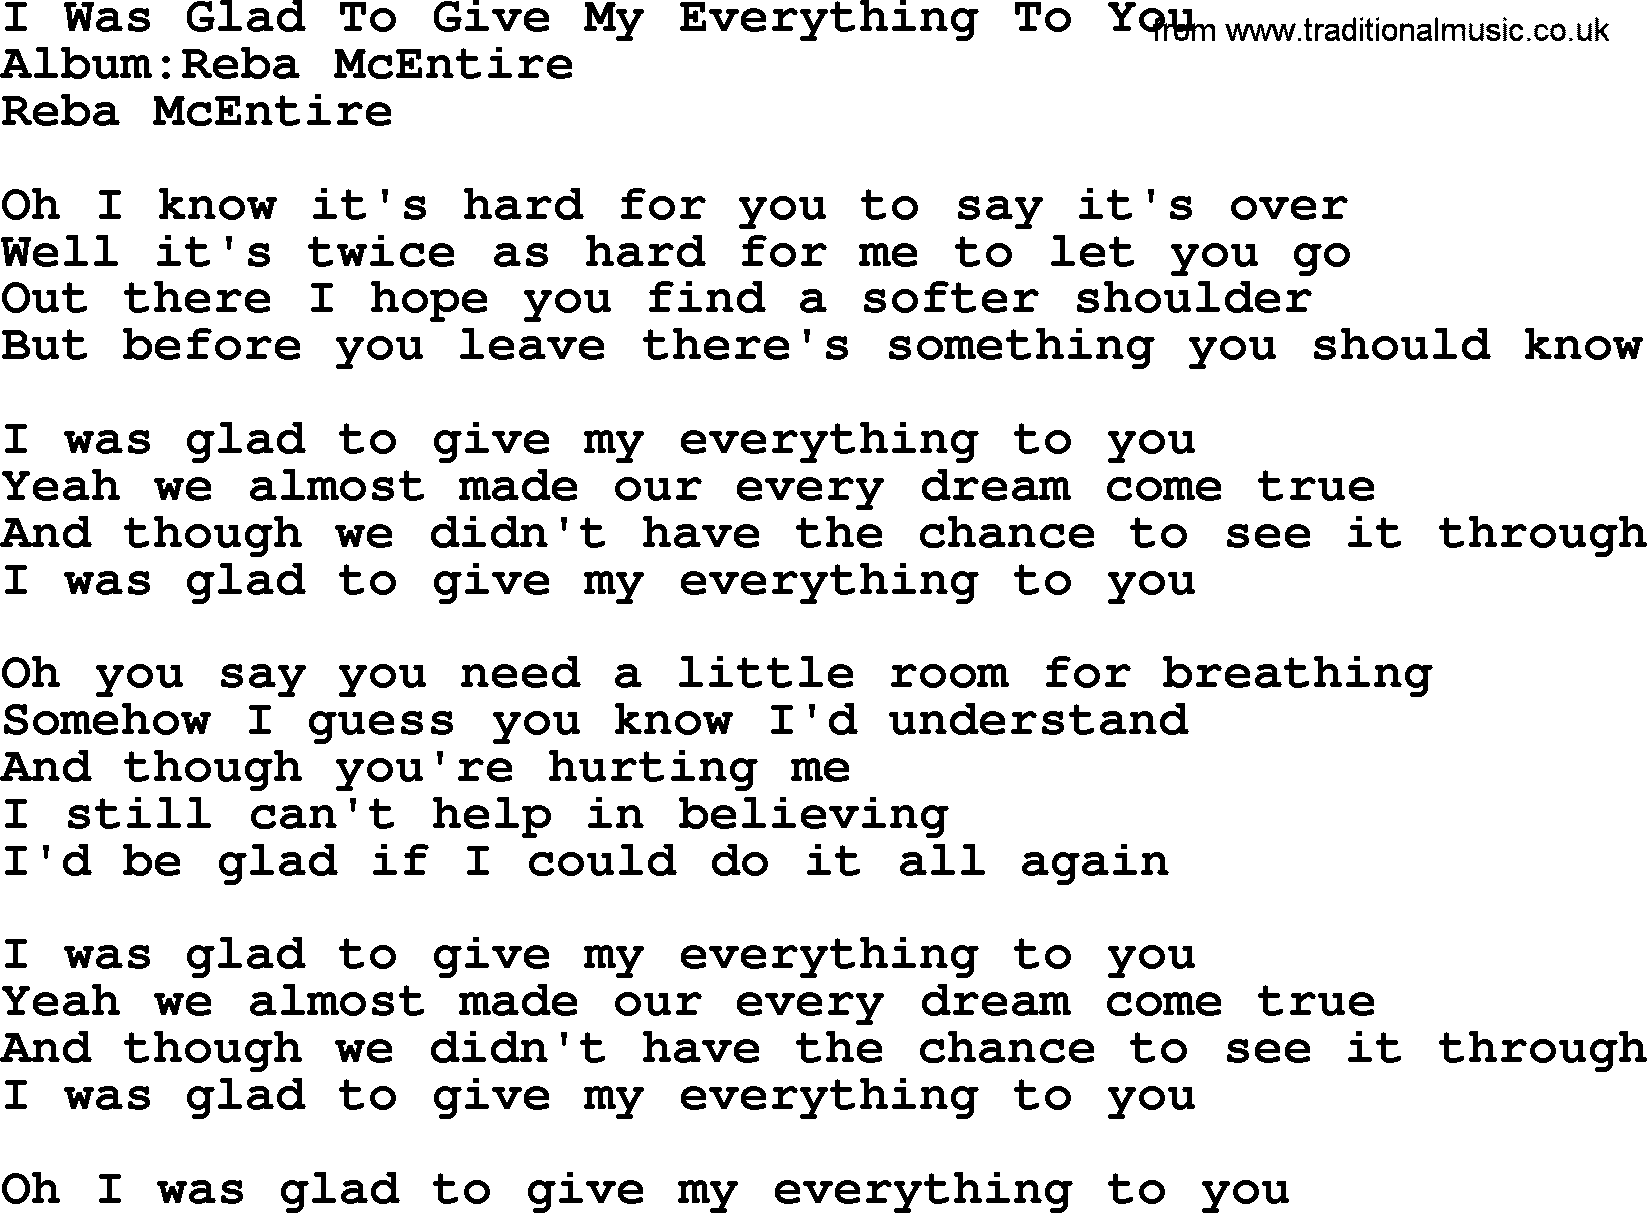 Reba McEntire song: I Was Glad To Give My Everything To You lyrics